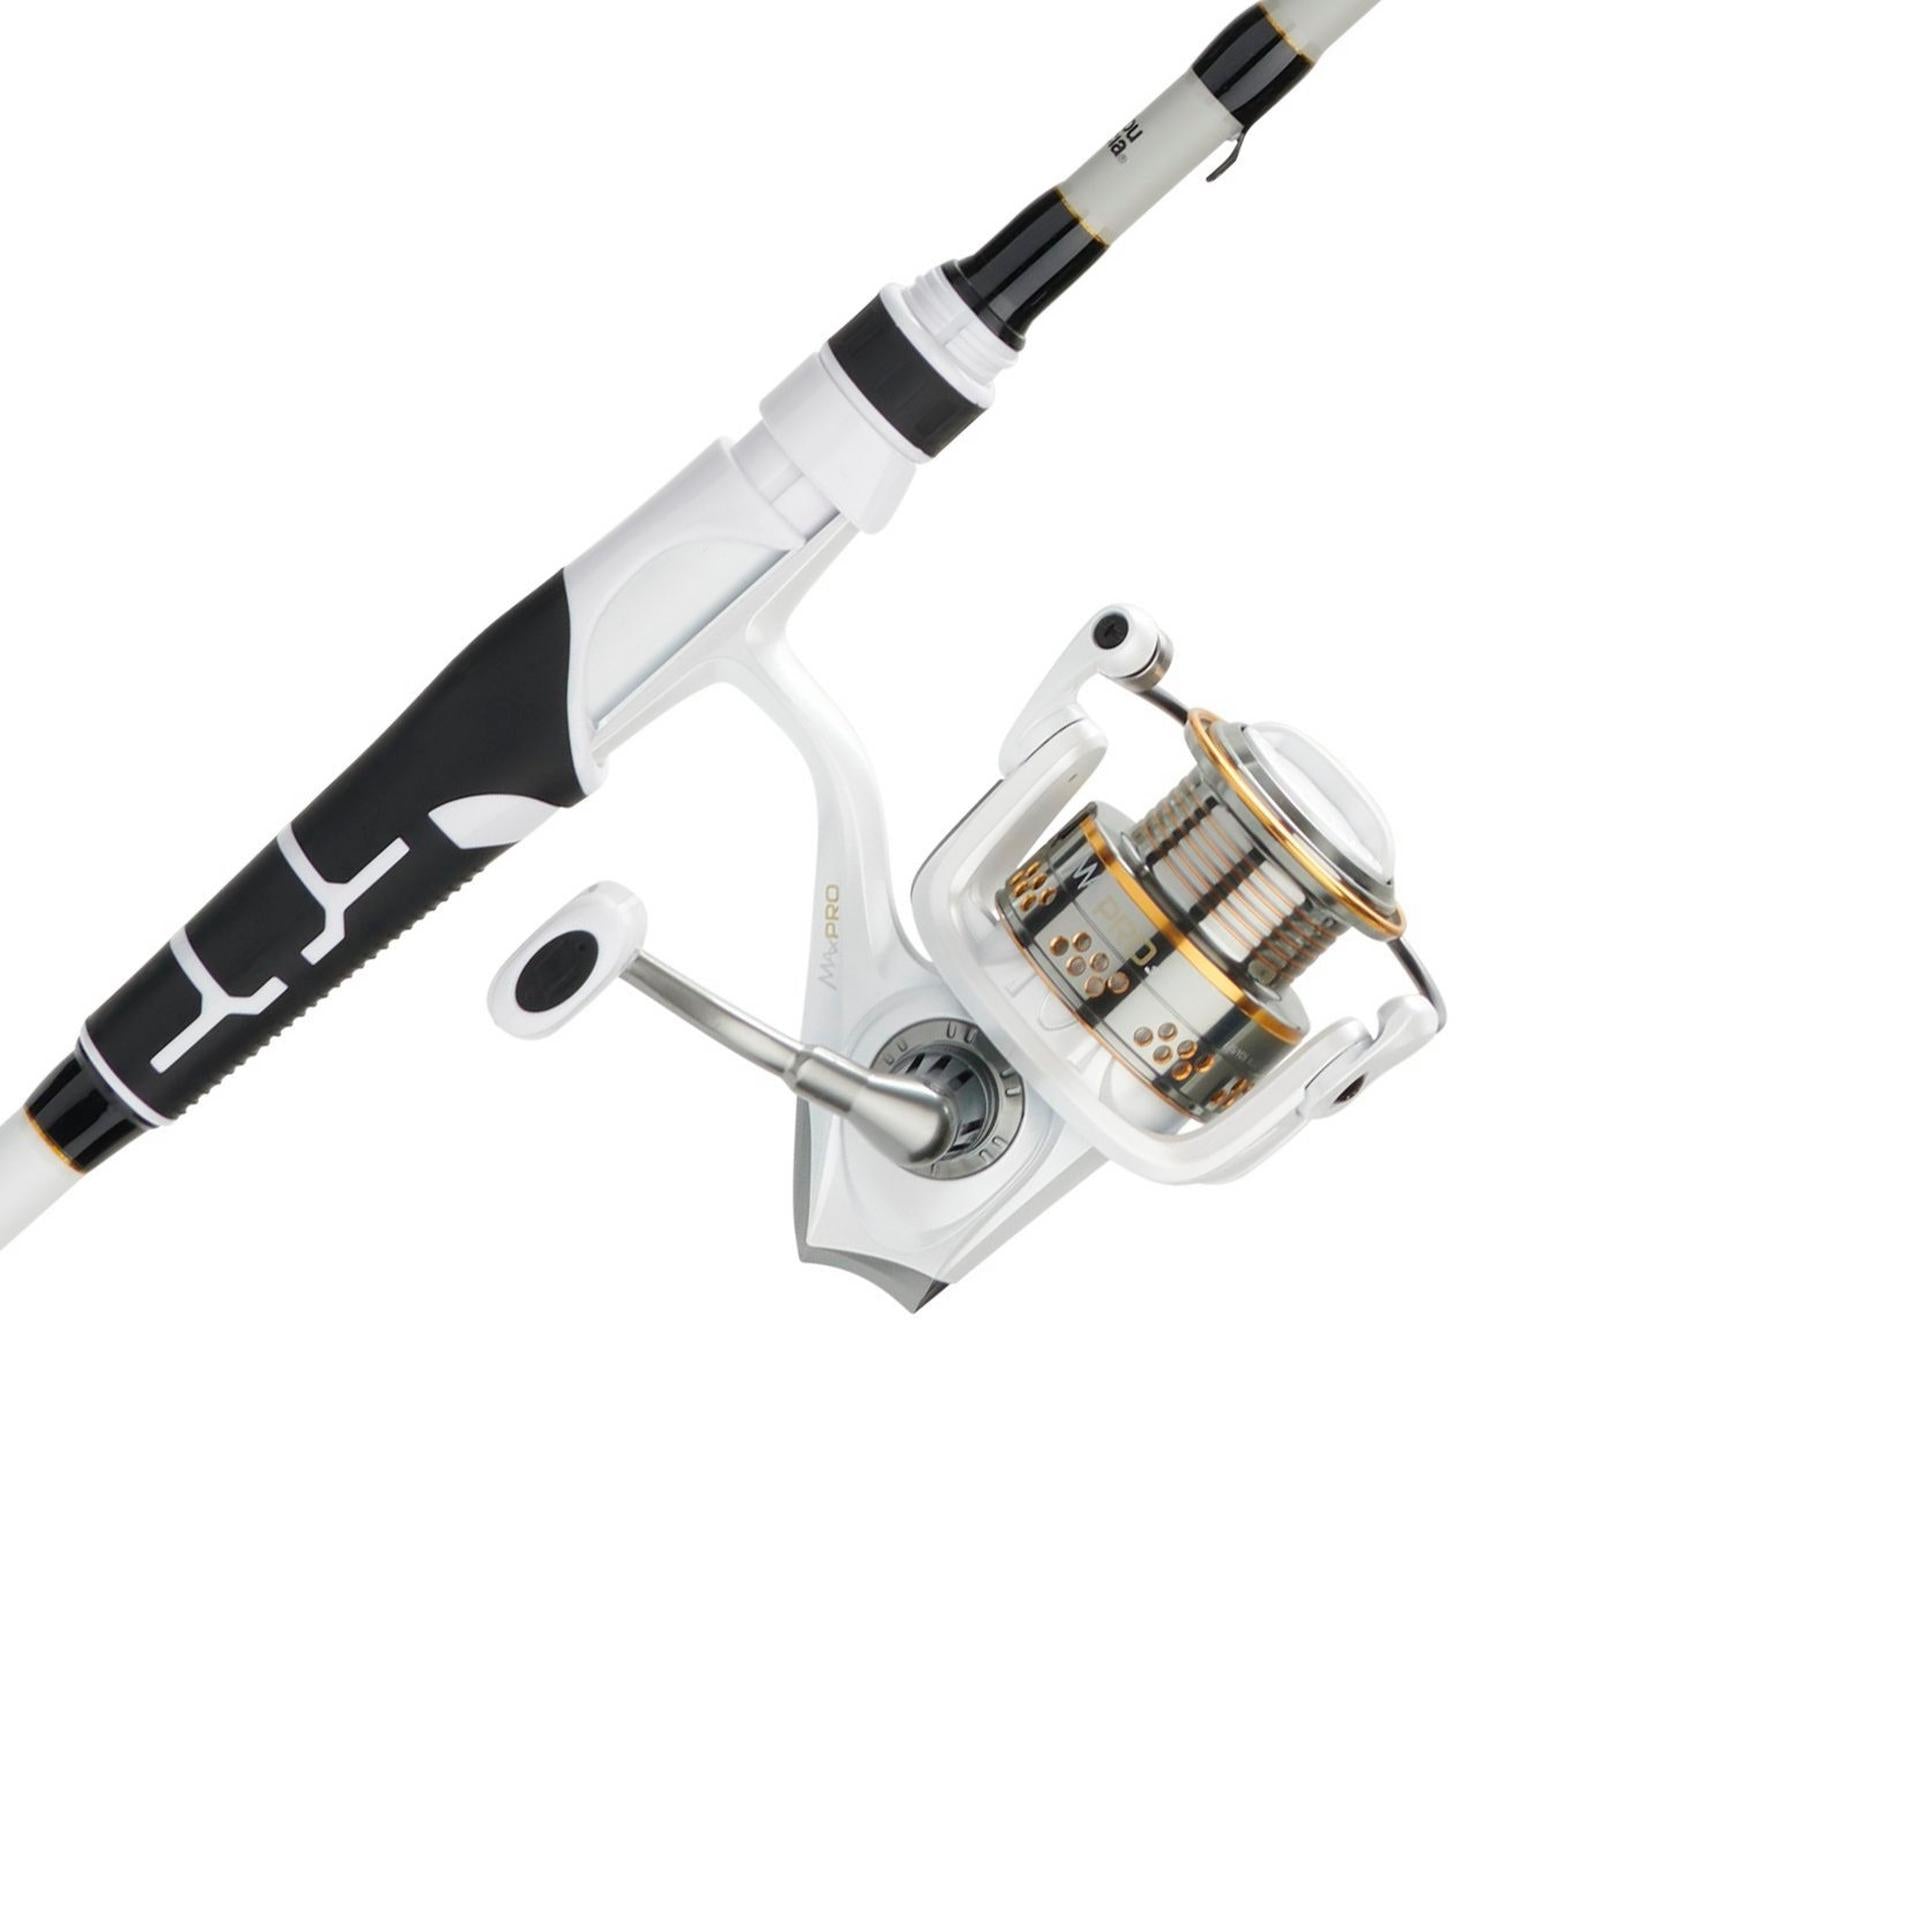 Max Pro Spinning Combo with Bait Pack | Abu Garcia®